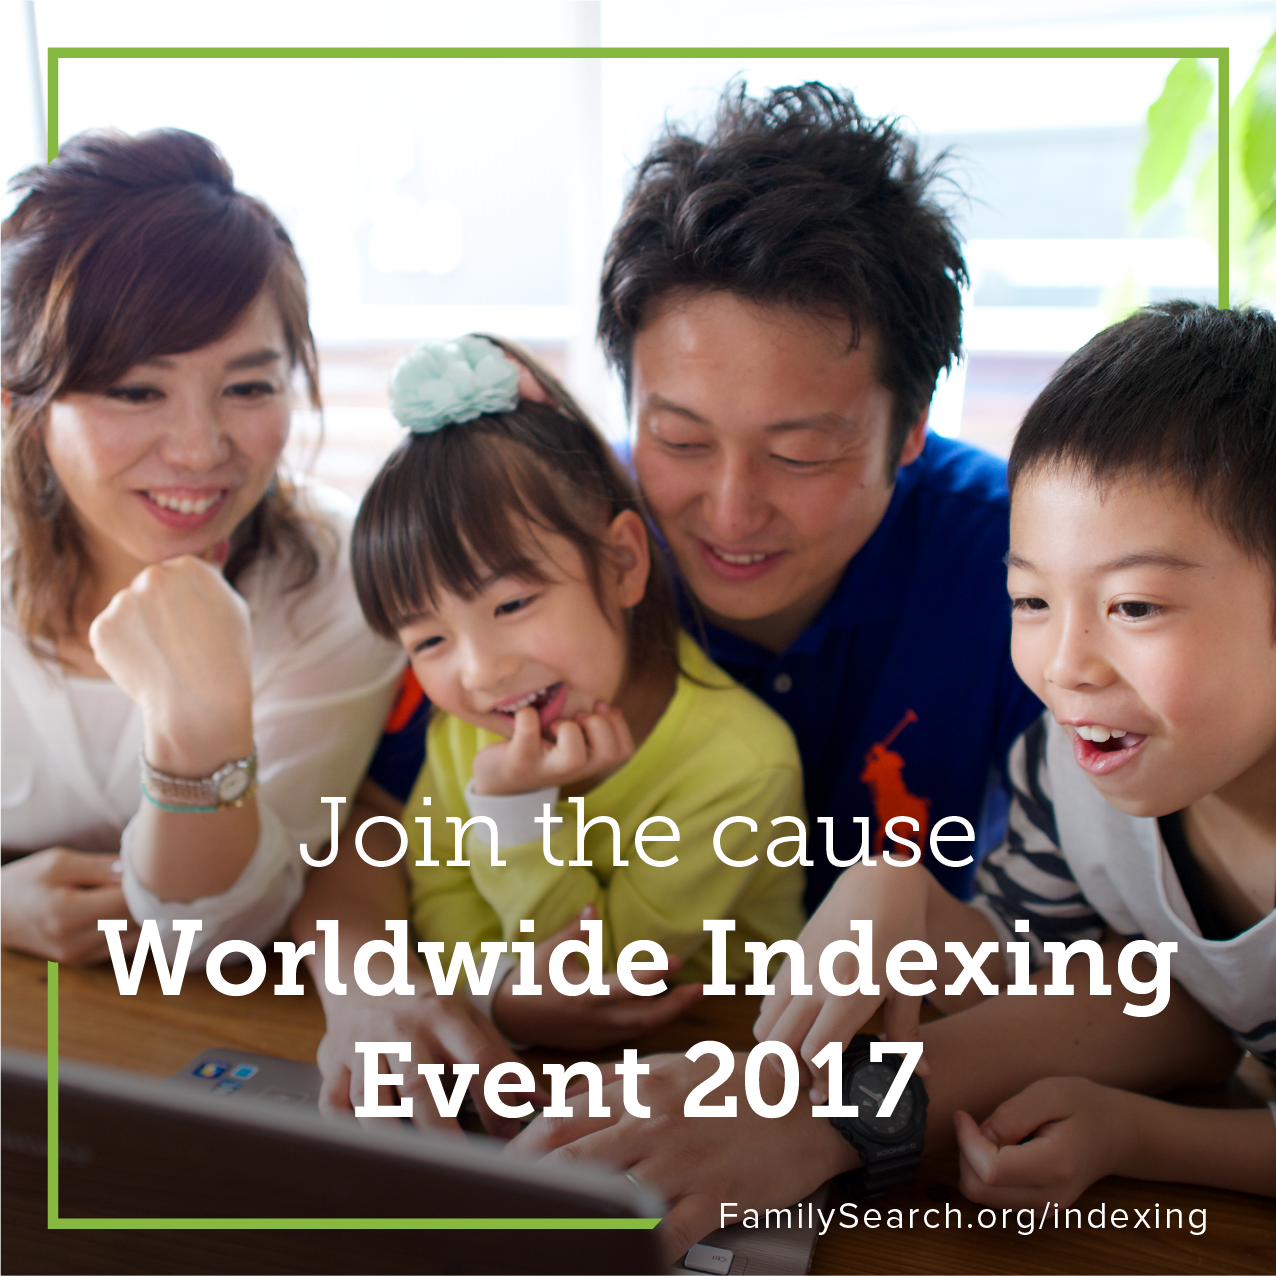 The FamilySearch Worldwide Indexing Event engages online volunteers to make the historic genealogical records freely and easily searchable online.